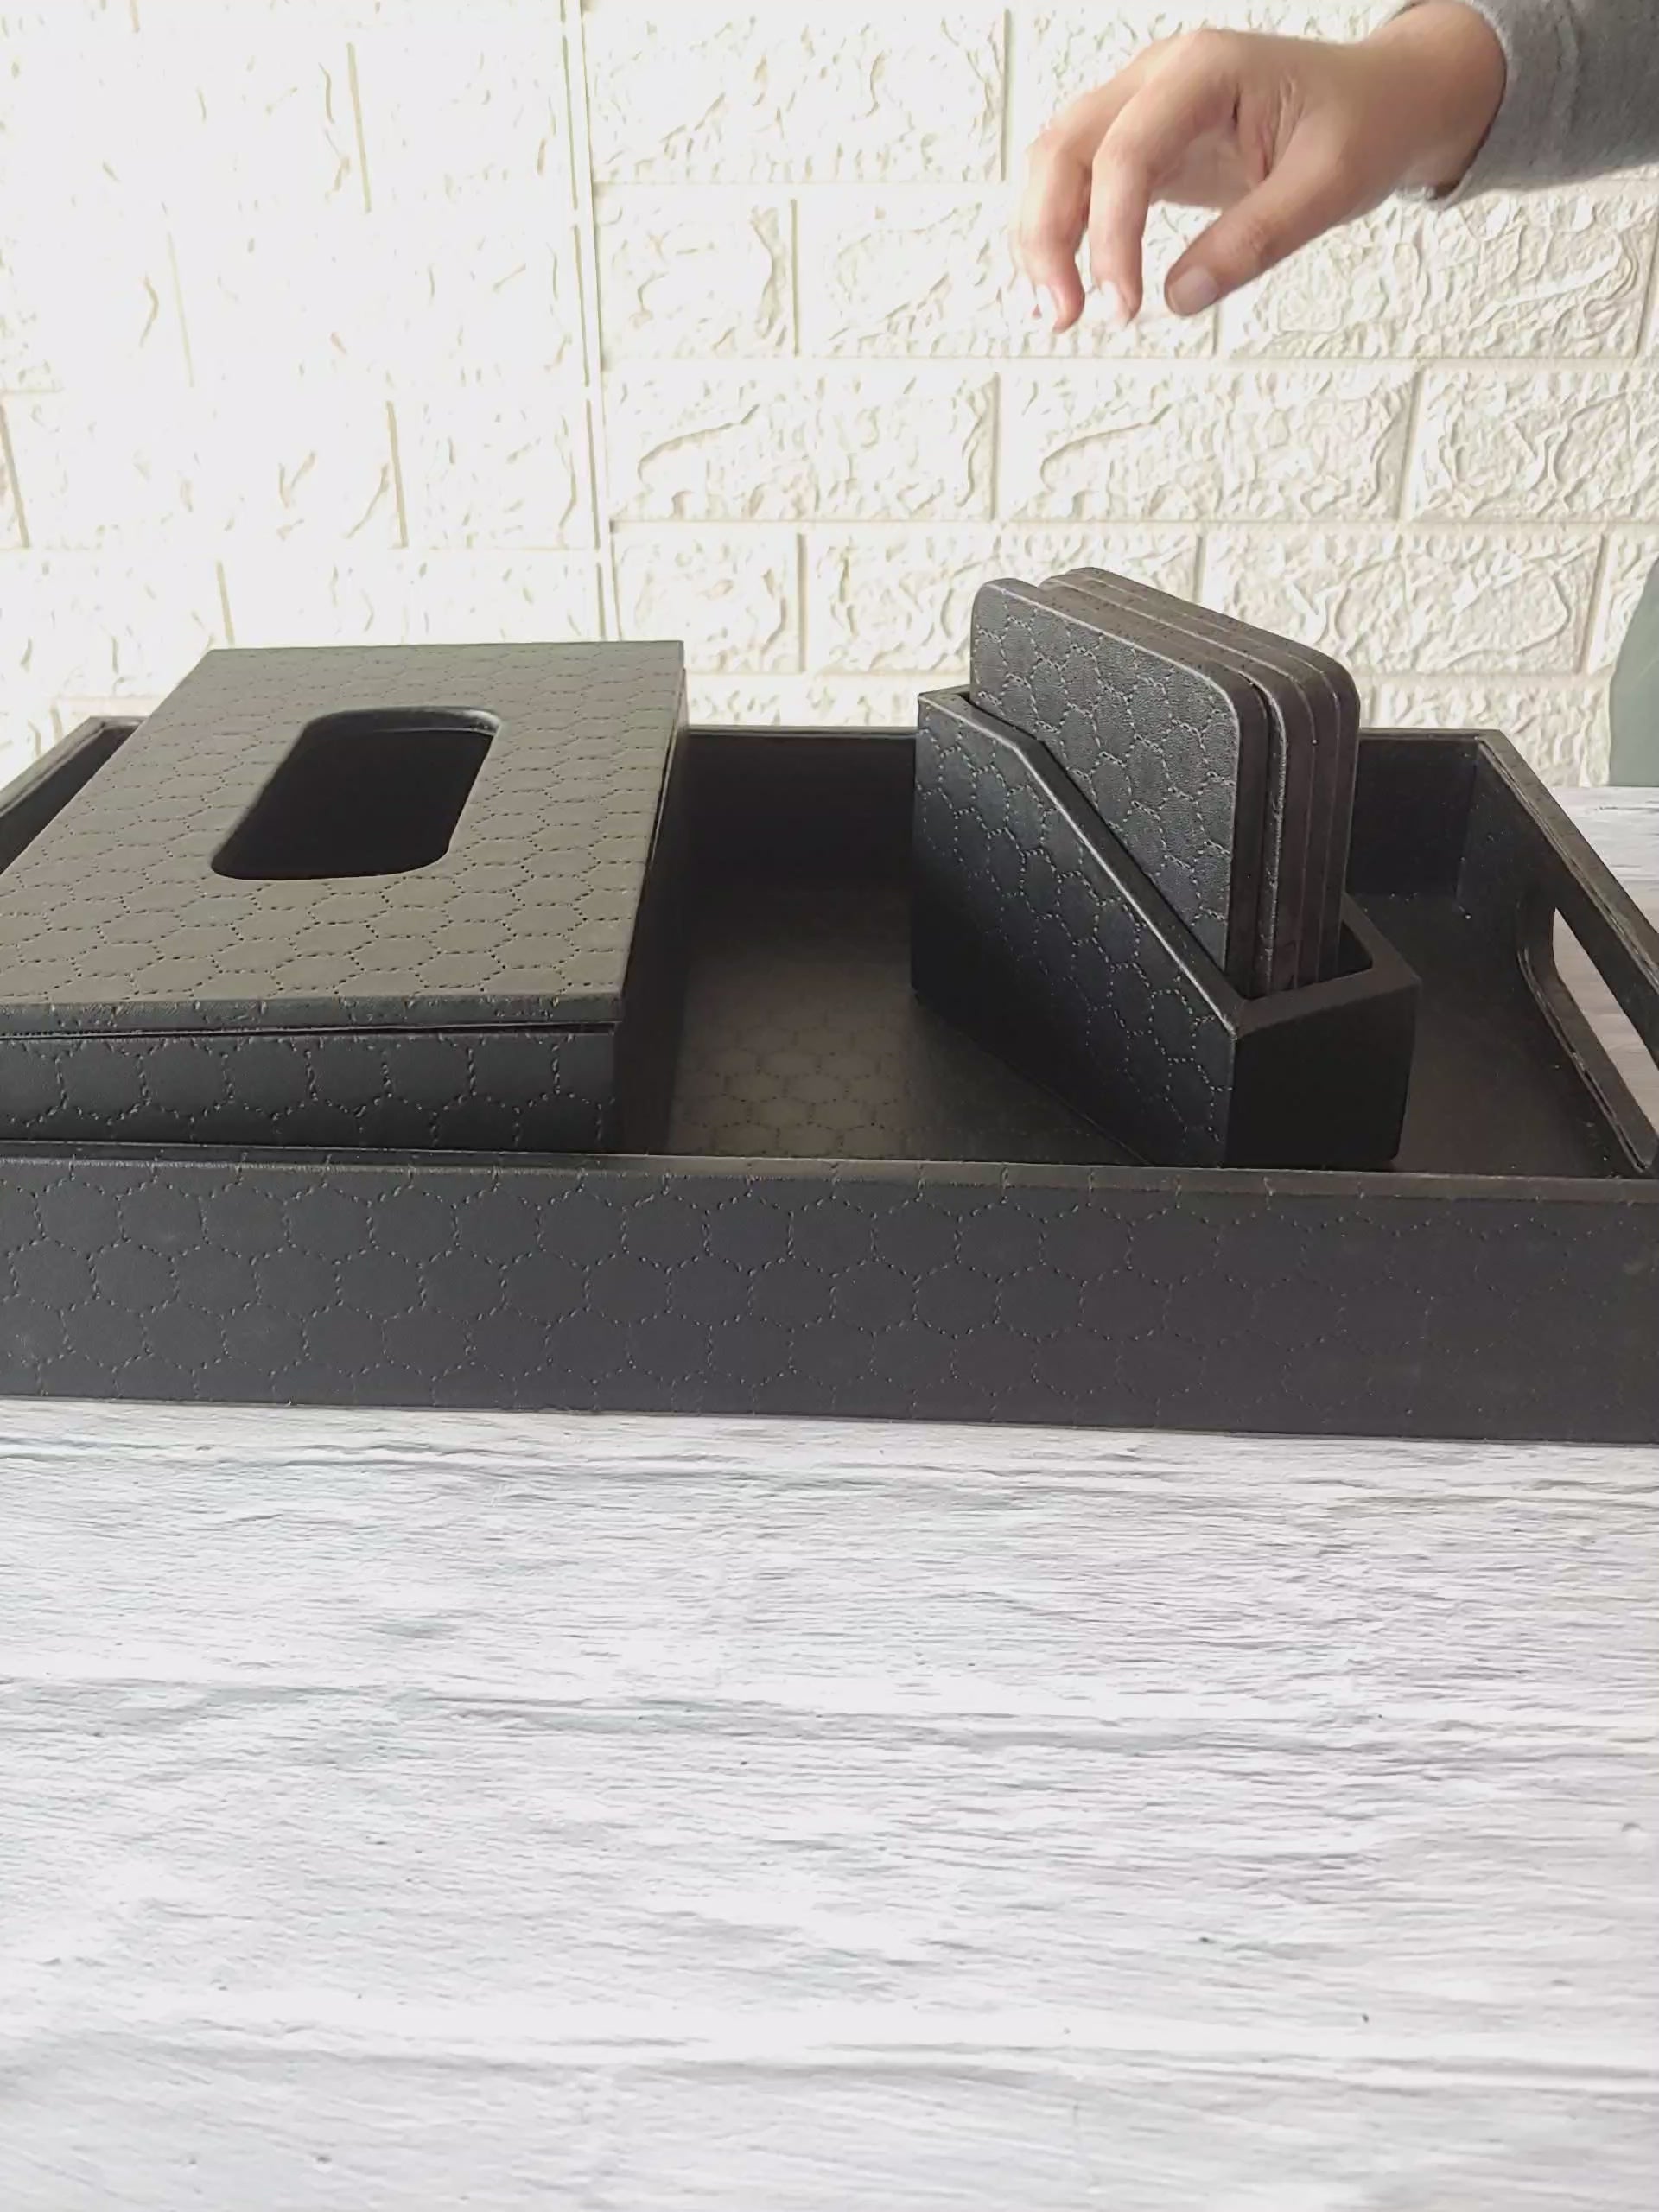 Black Stitched Premium Leather Serving Tray along with tissue holder and coasters